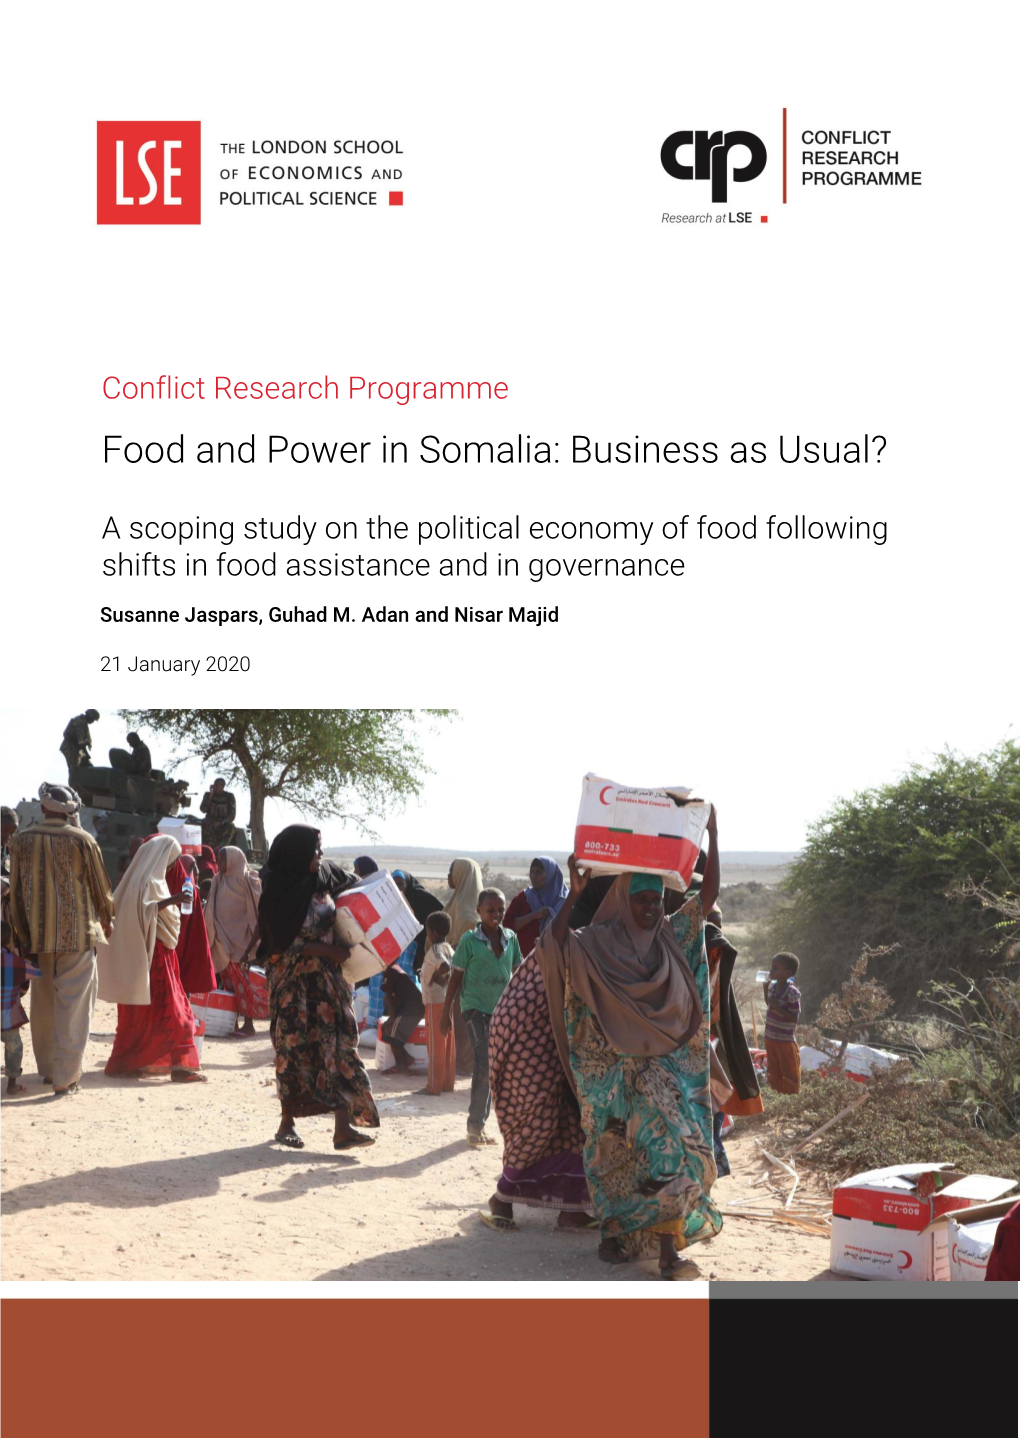 Food and Power in Somalia: Business As Usual?